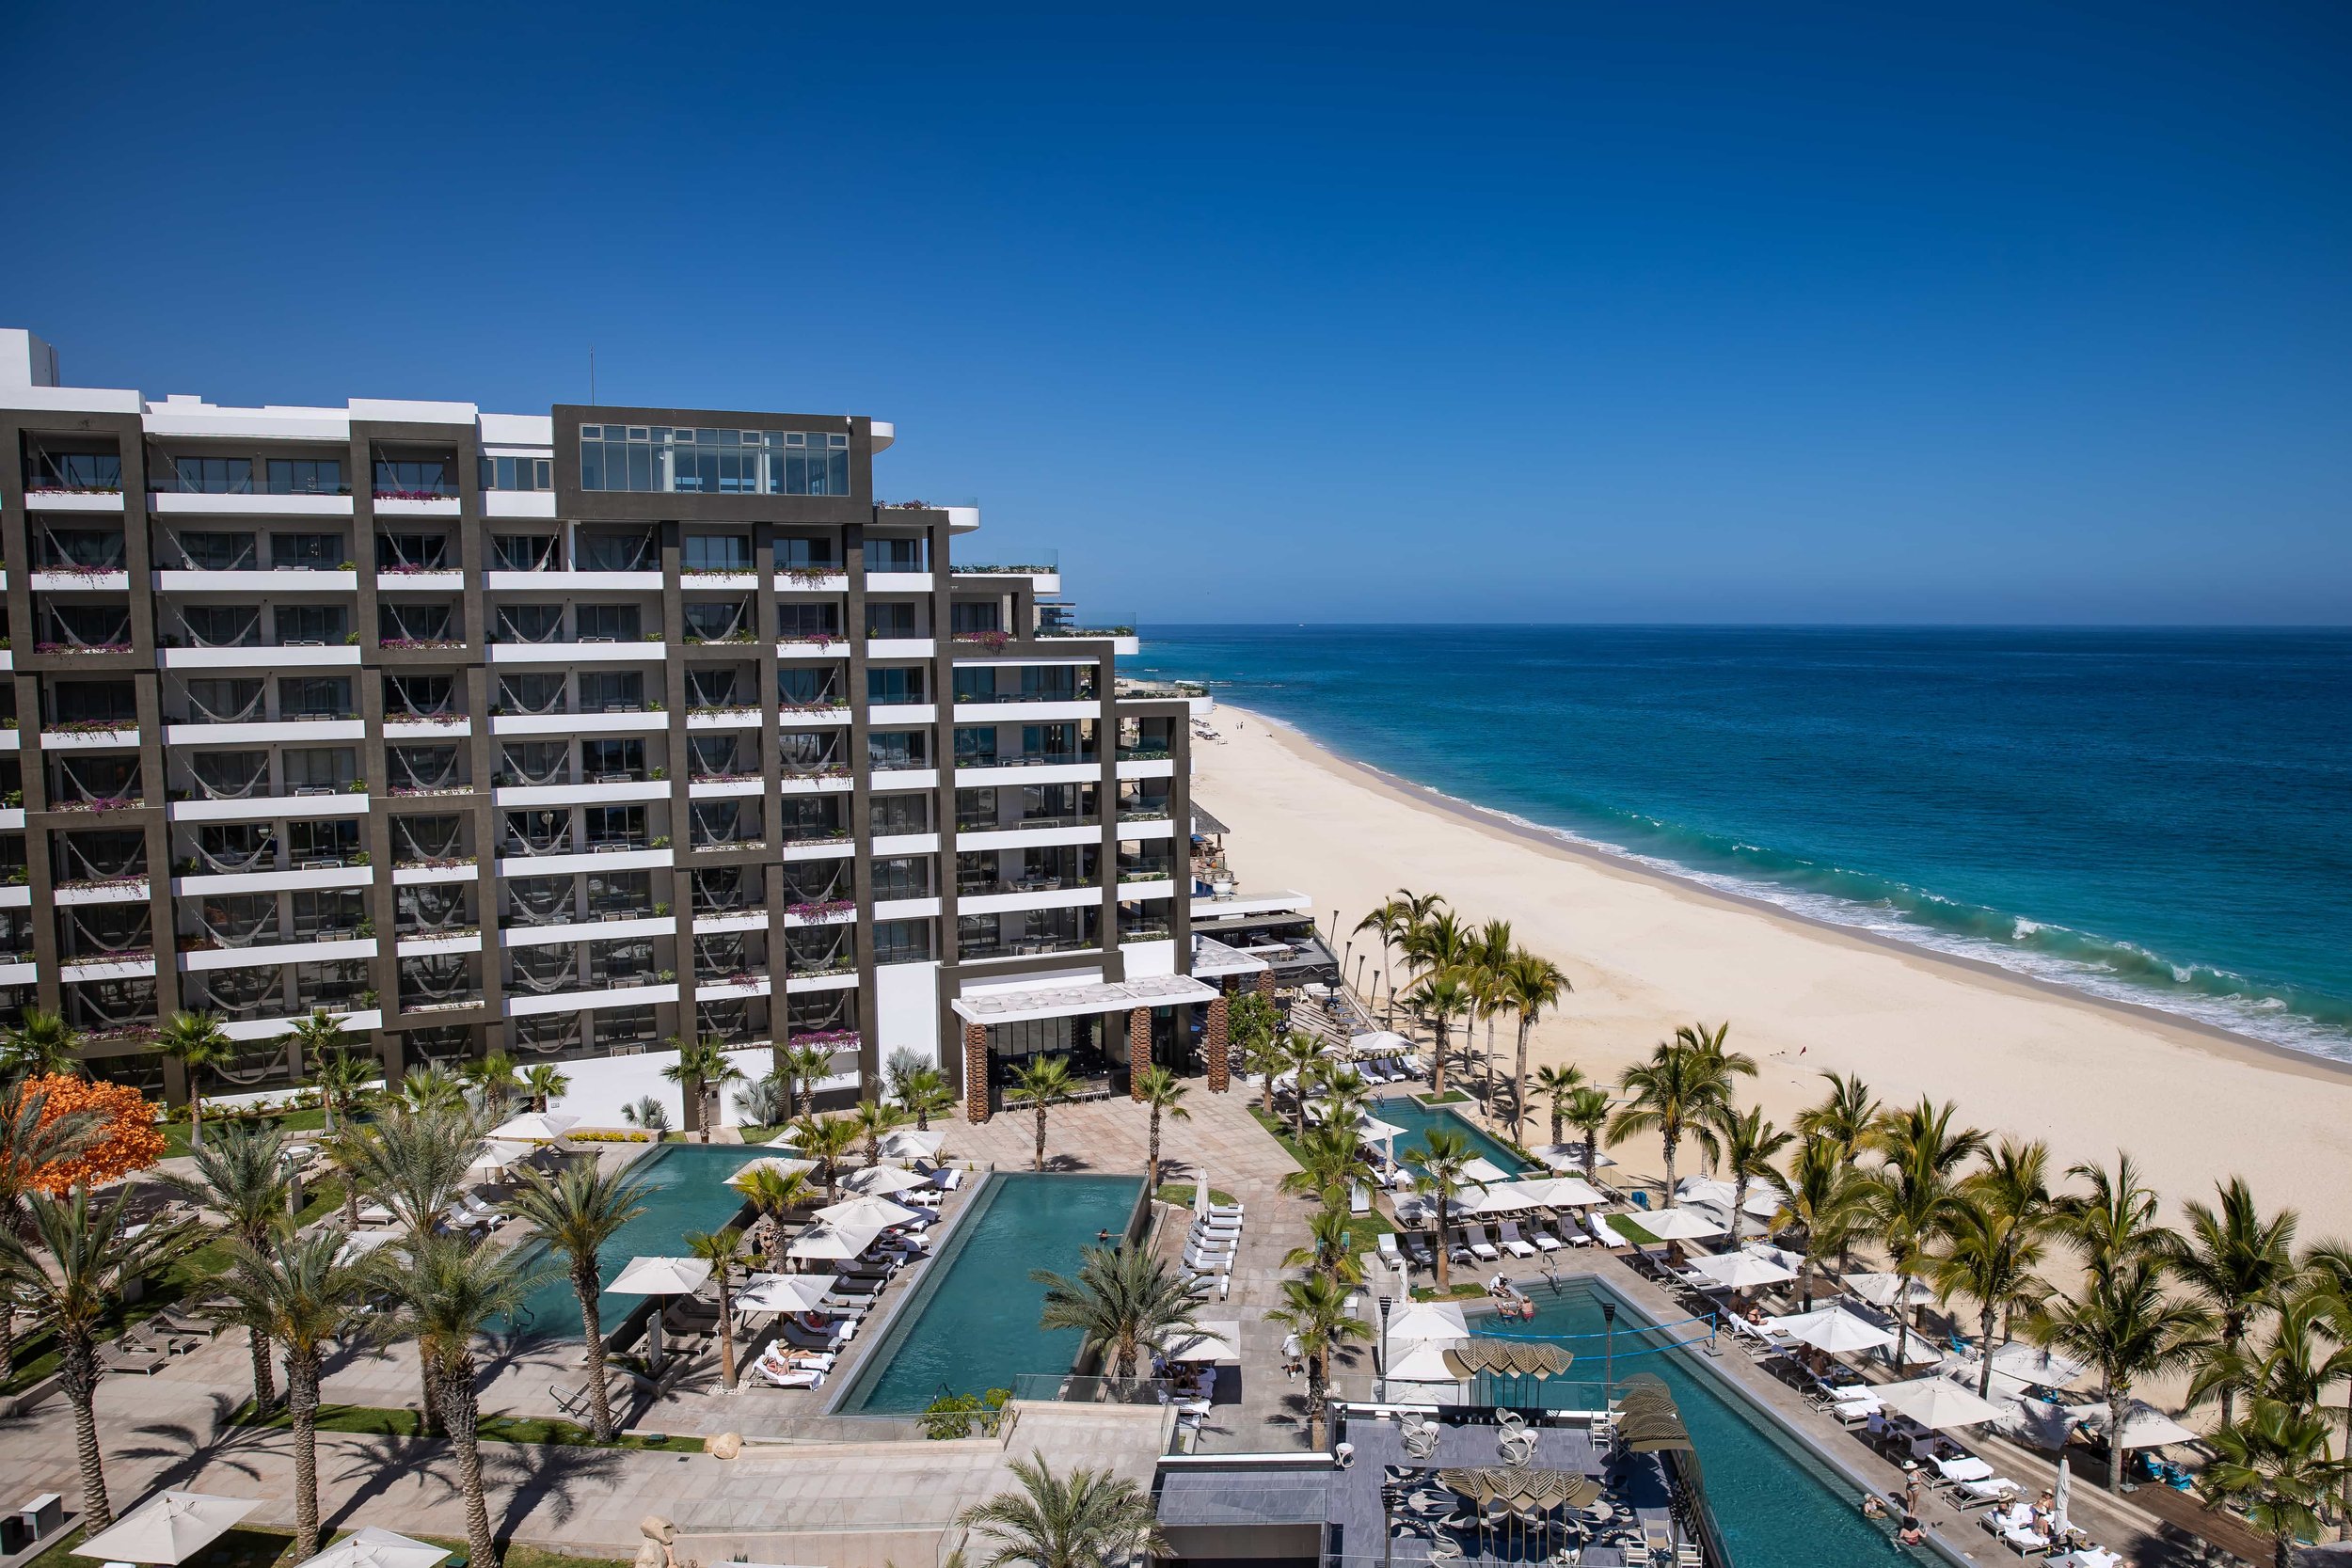  A luxurious Cabo beachfront hotel with multiple balconies overlooking a pool area surrounded by palm trees, with a wide, sandy beach and the ocean extending into the horizon. Garza Blanca 